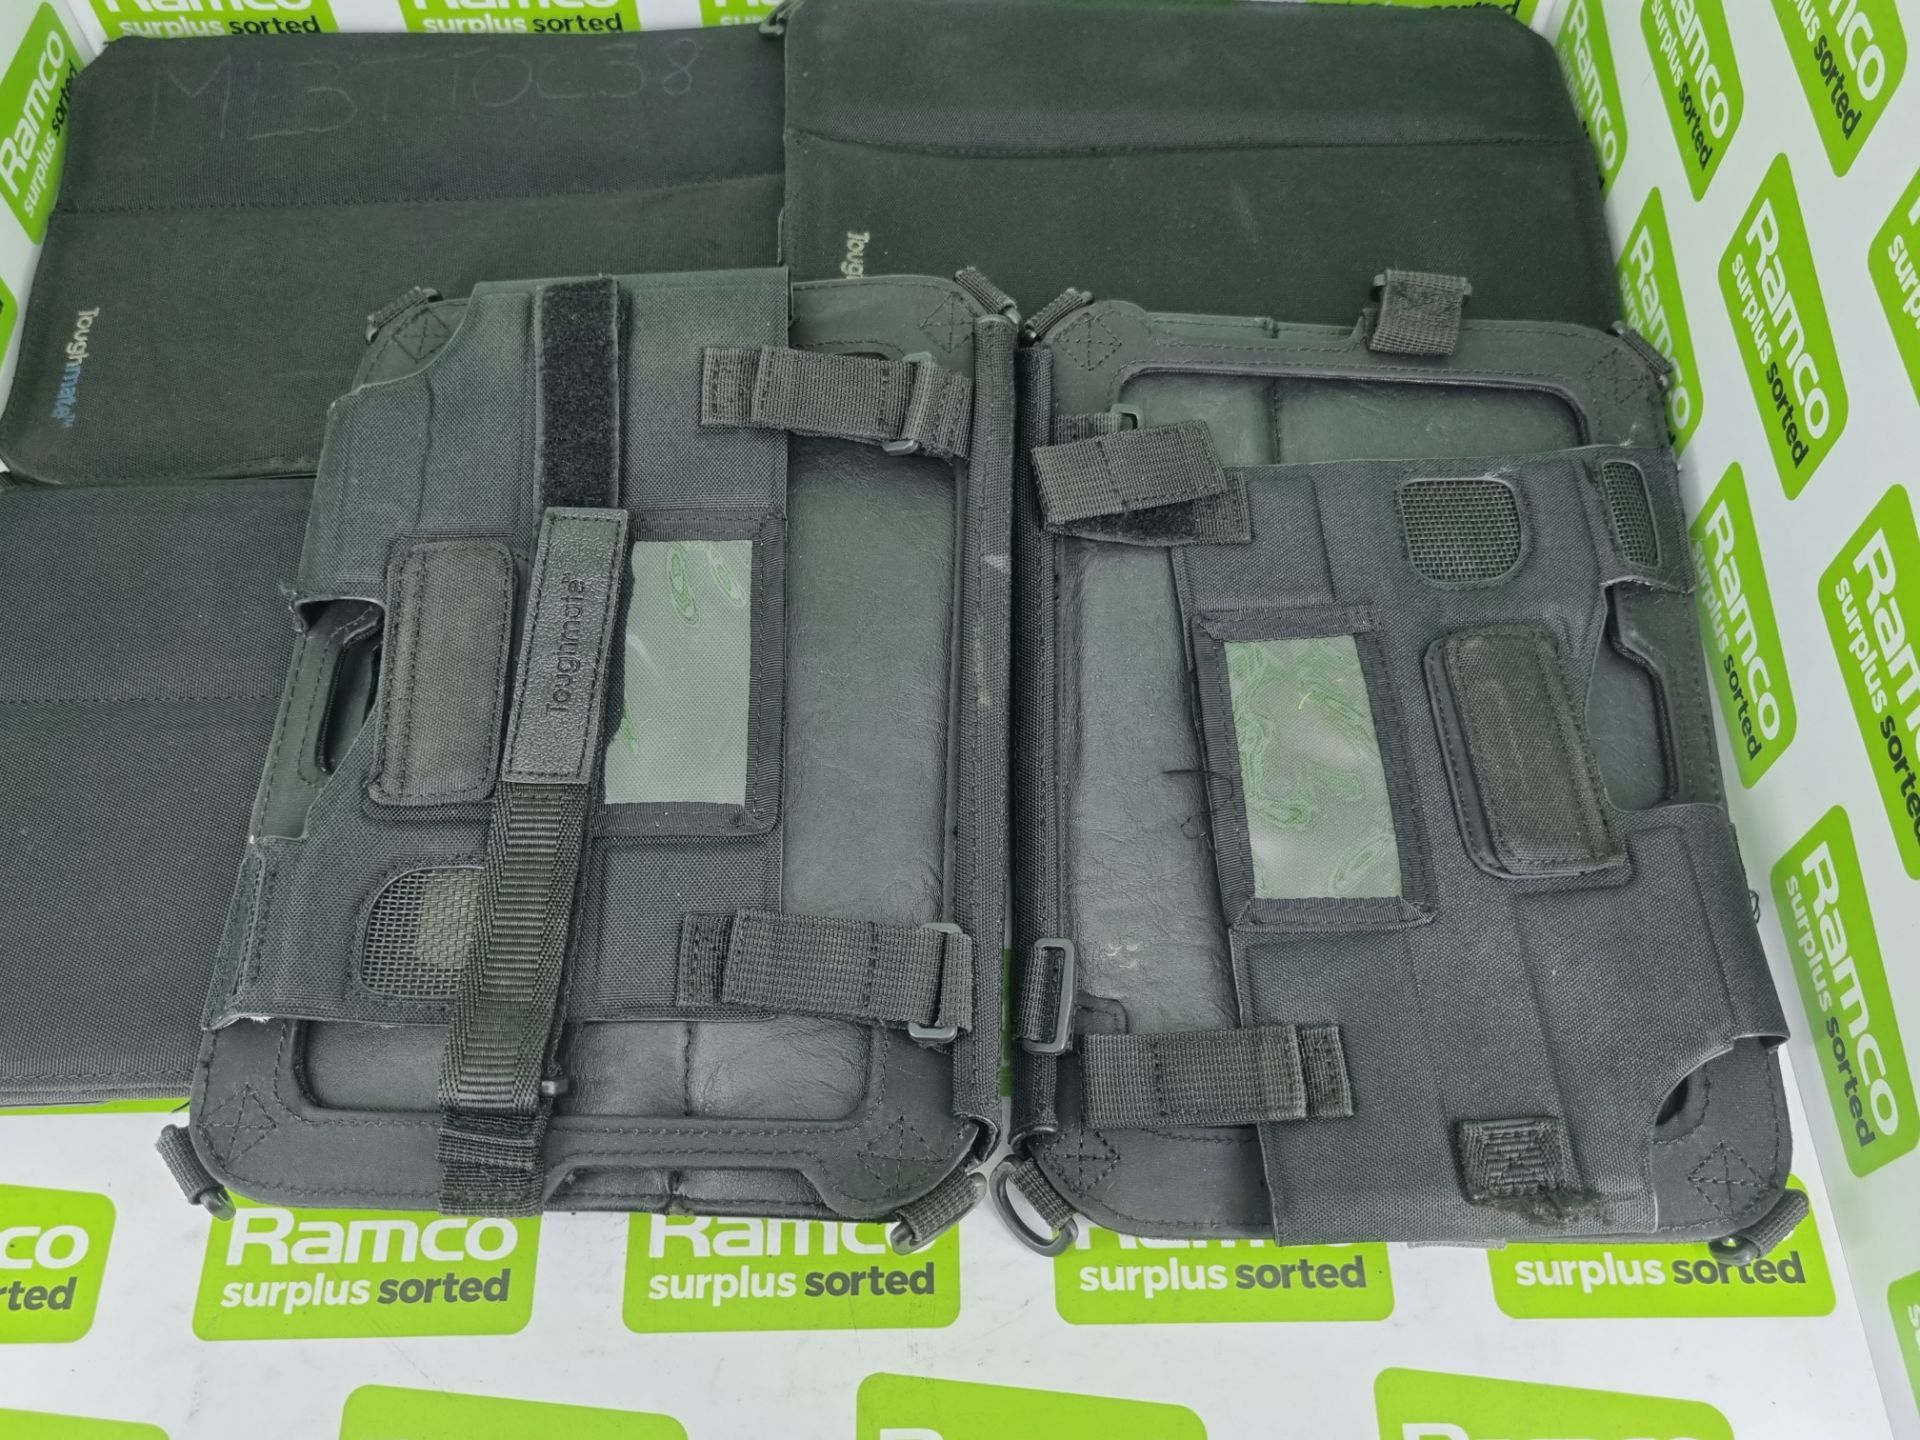 5x Toughmate tablet hand holder cases - Image 2 of 3